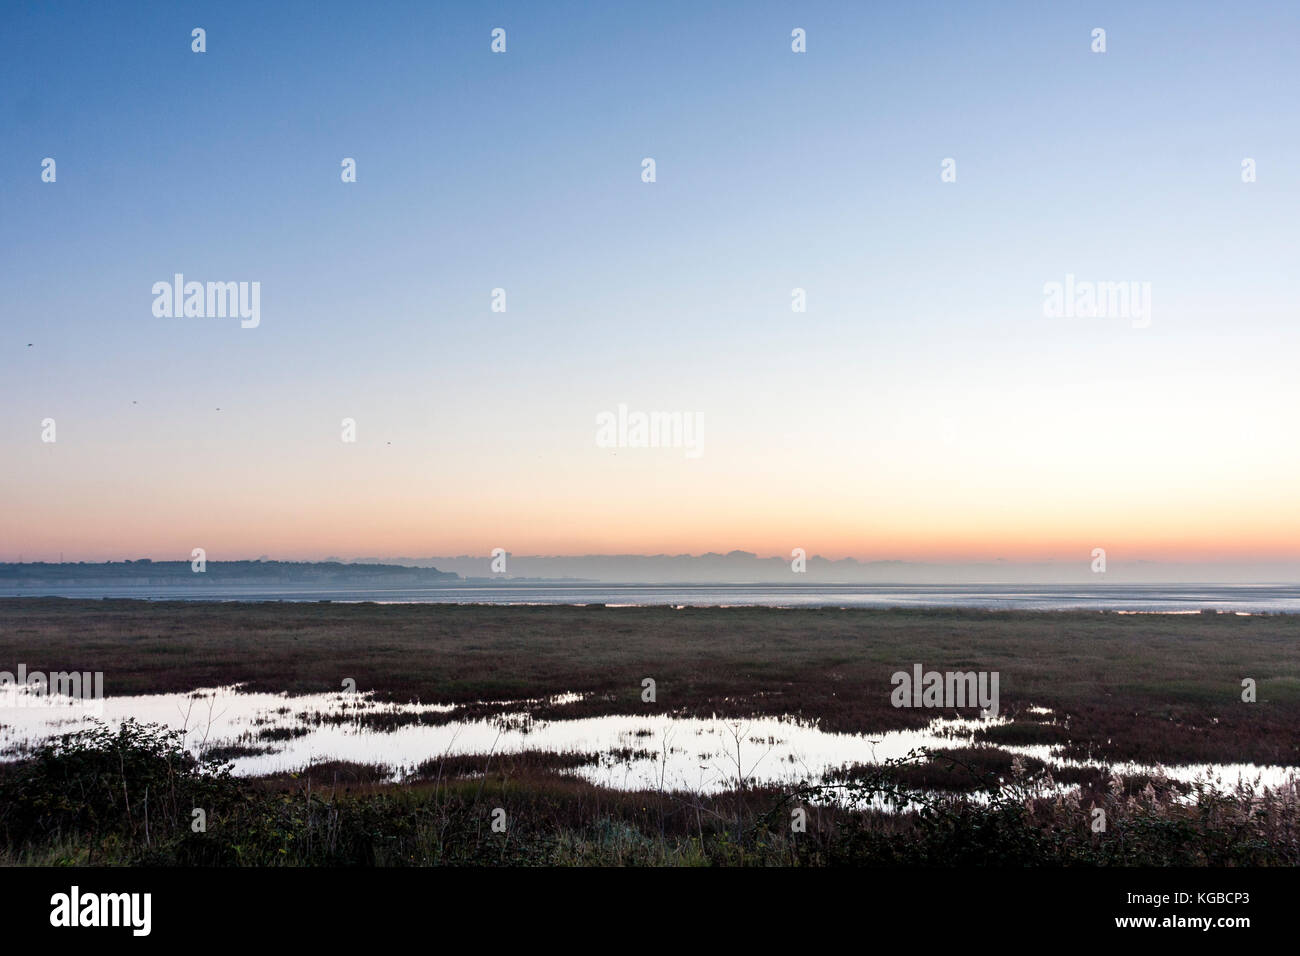 England, Ramsgate, Pegwell Bay. Day break and dawn sky over the English channel with the saltwater marsh in foreground. Band of orange sky on horizon turning to blue. Stock Photo